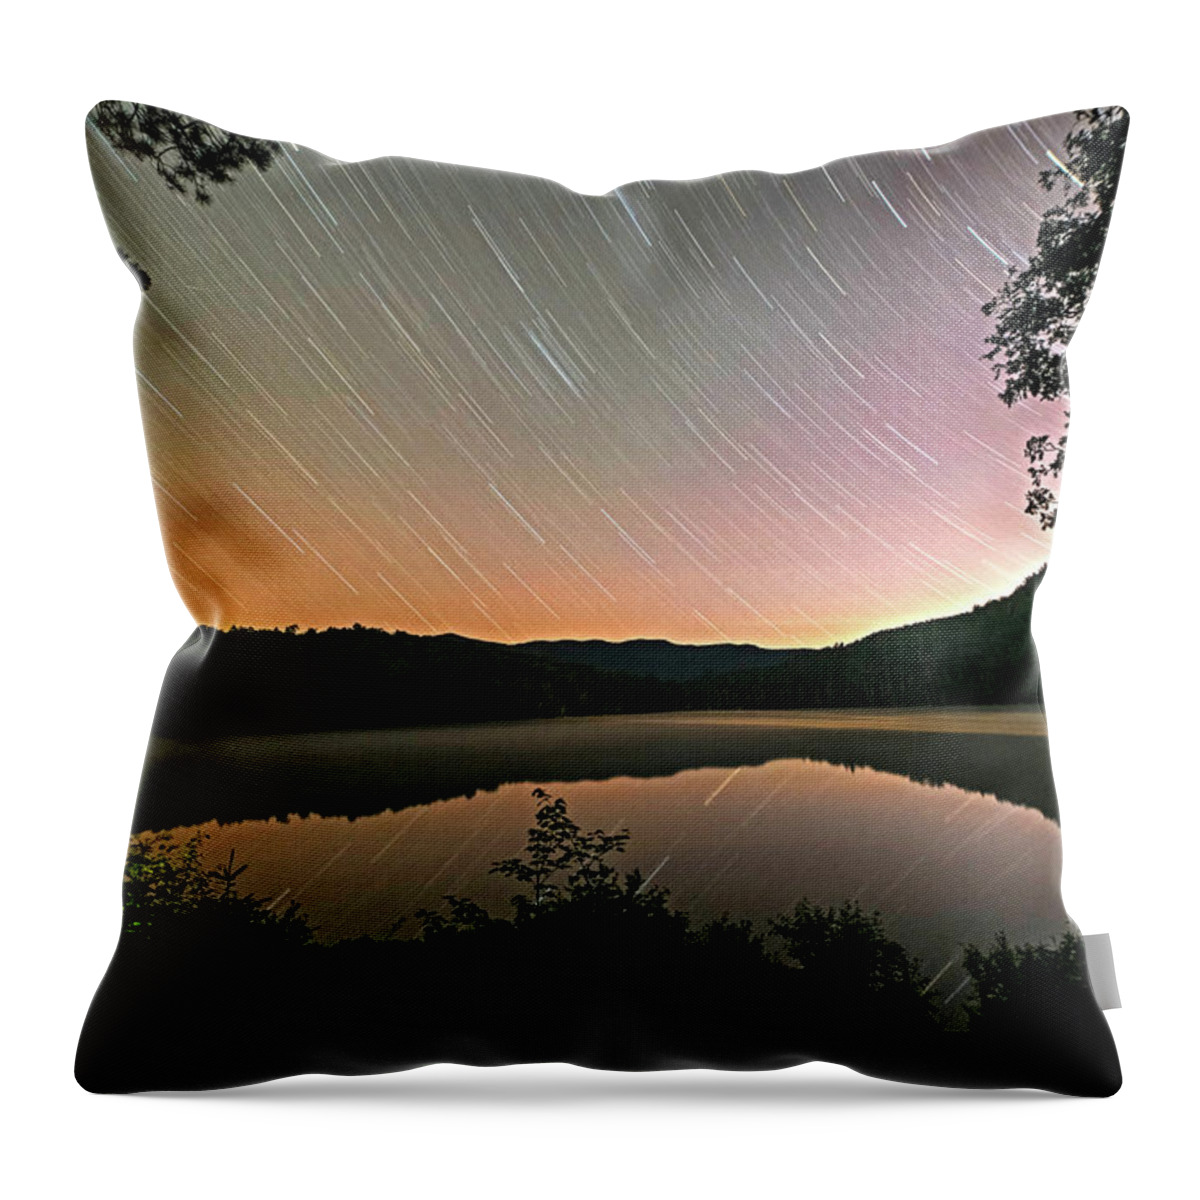 Heart Throw Pillow featuring the photograph Heart Lake Star Trail Adirondacks North Elba by Toby McGuire